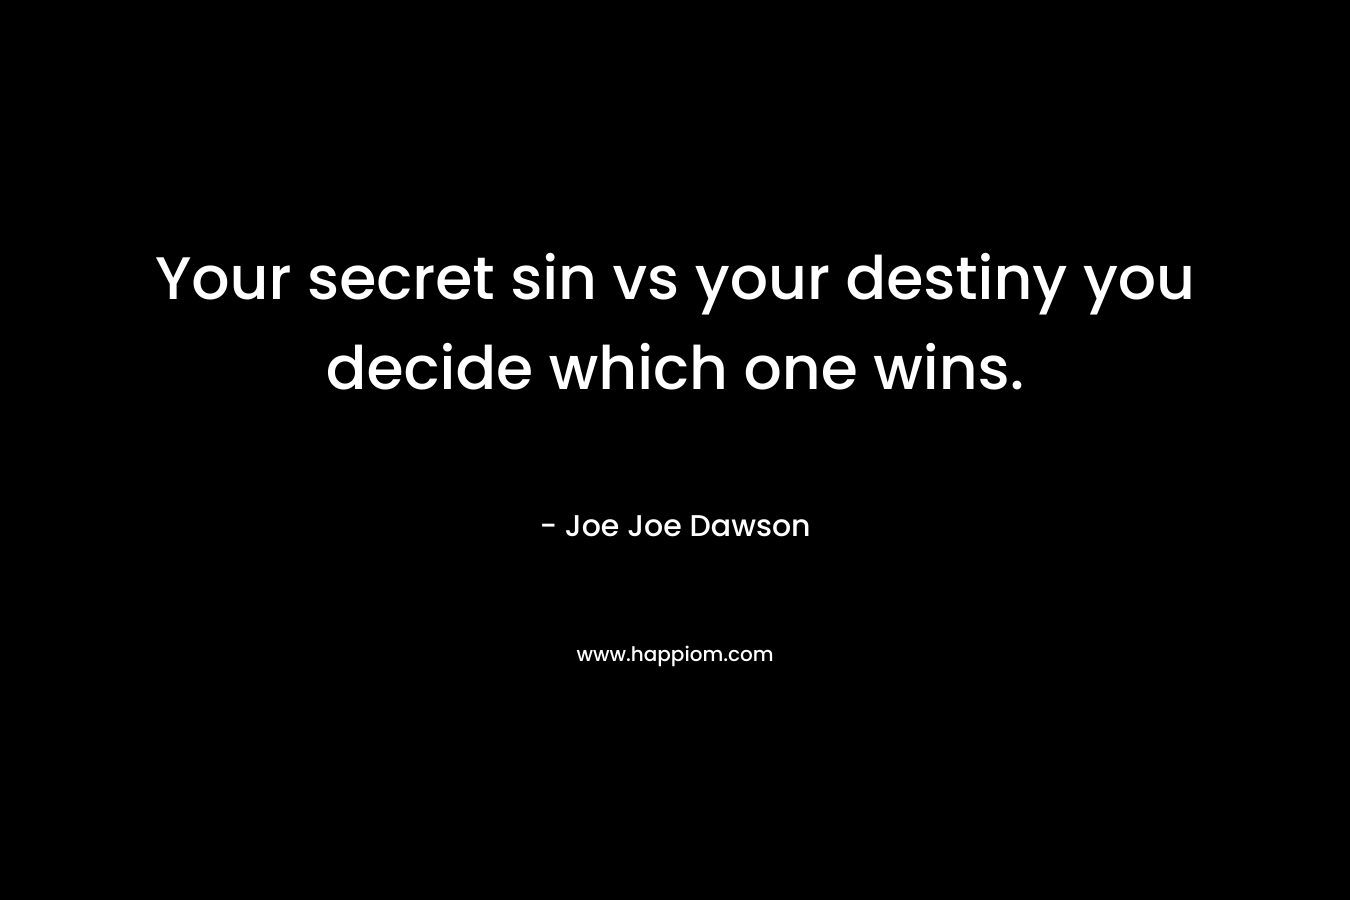 Your secret sin vs your destiny you decide which one wins.